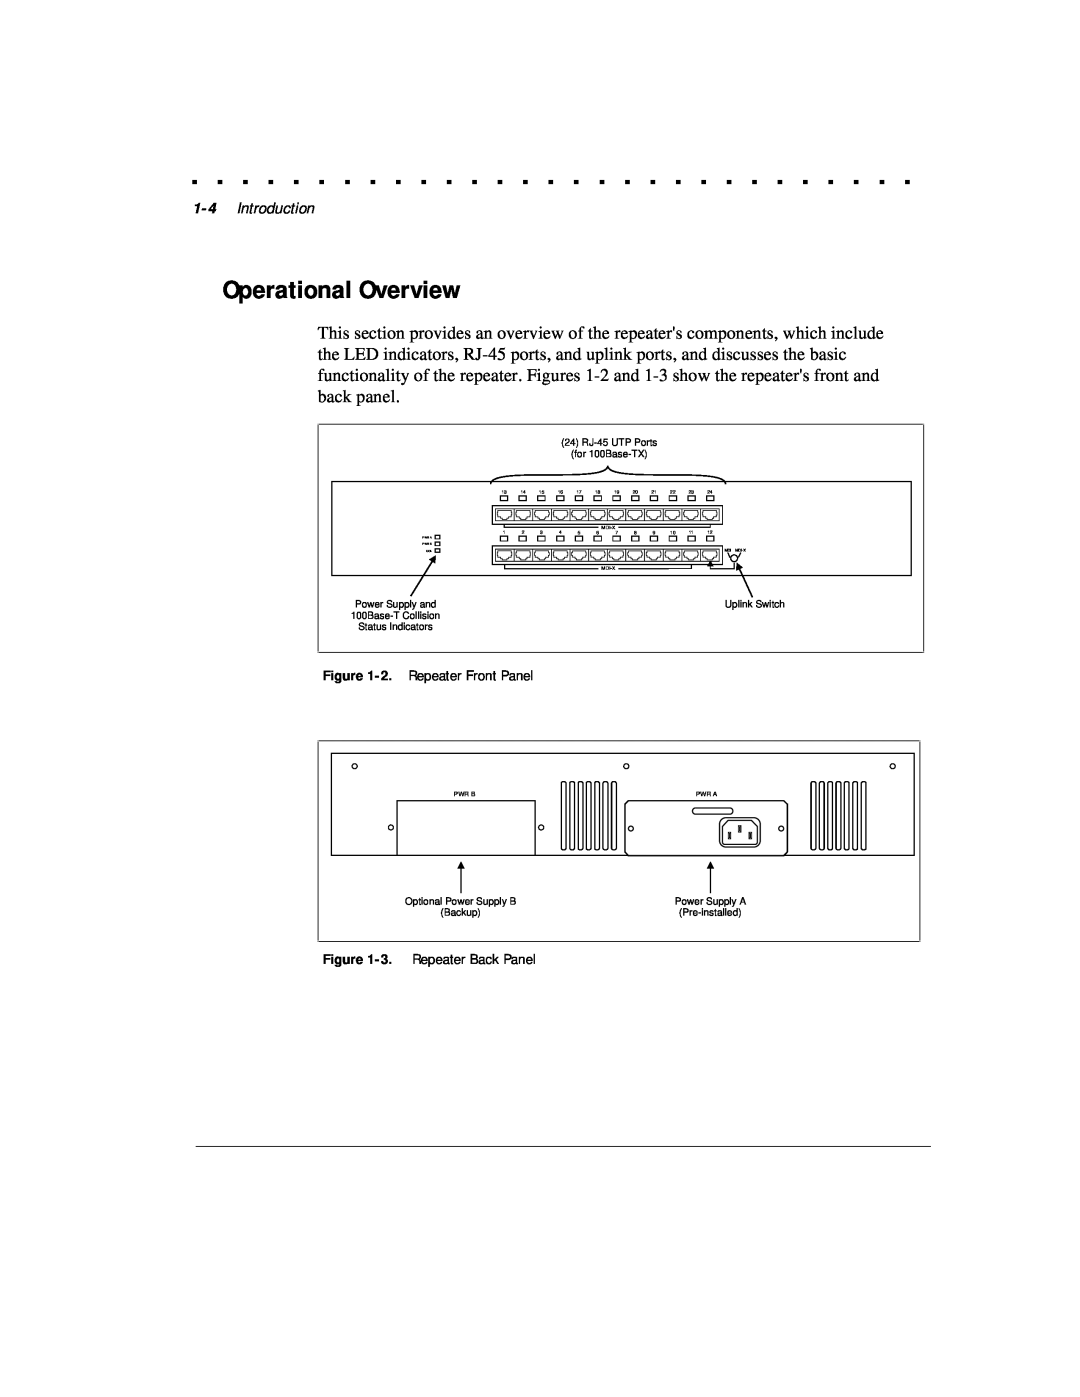 Compaq 1124 manual Operational Overview, Introduction 